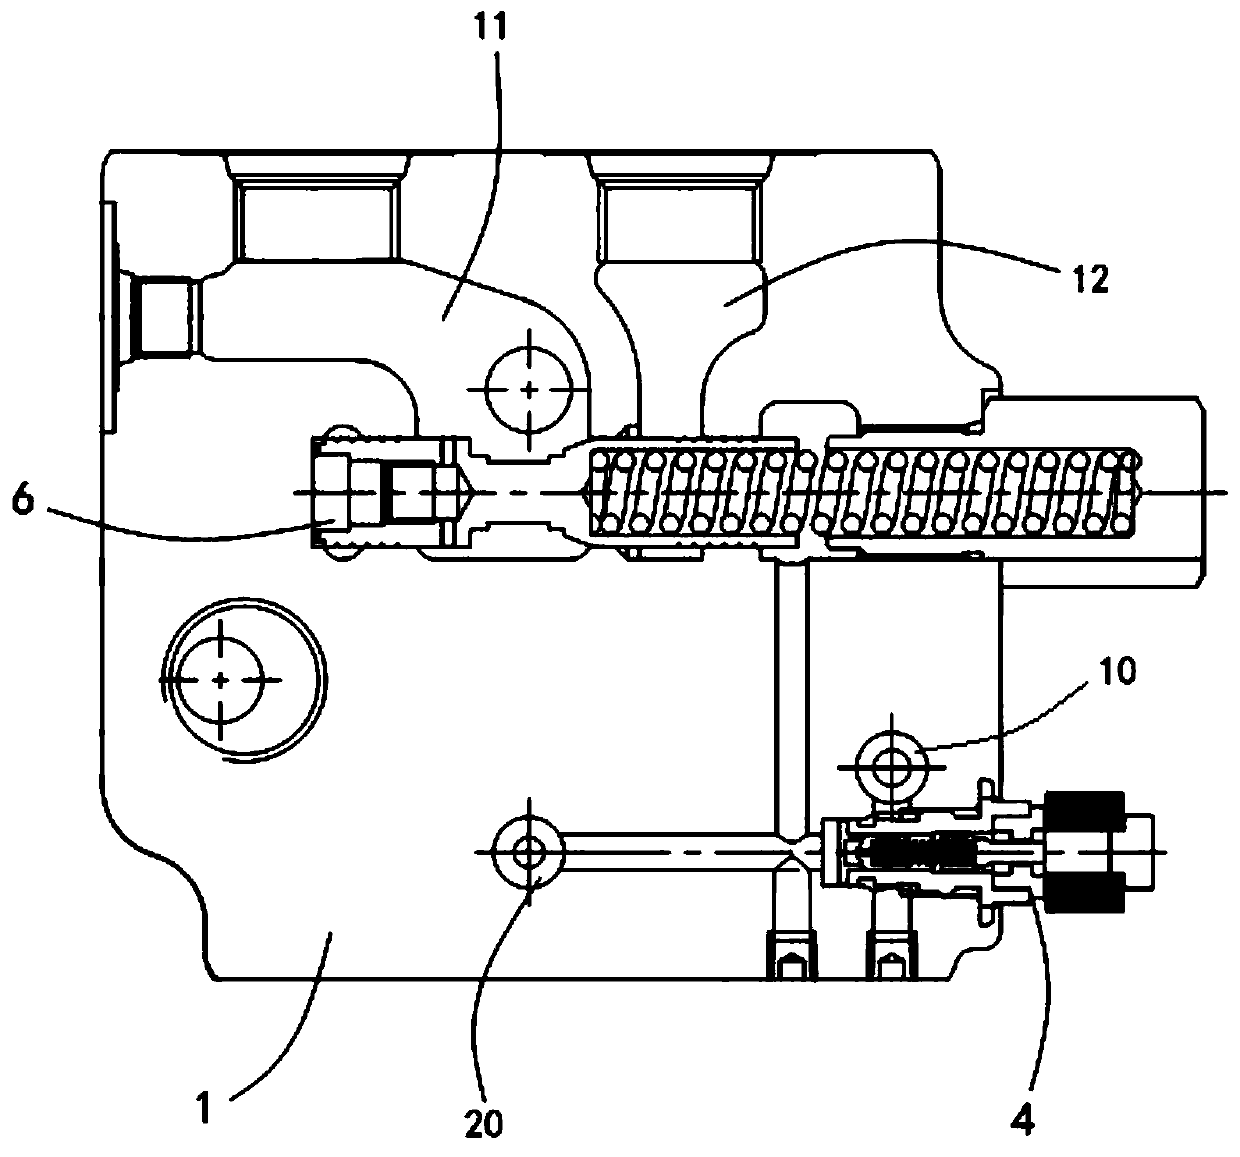 Combined multi-way valve and combined multi-way valve control system